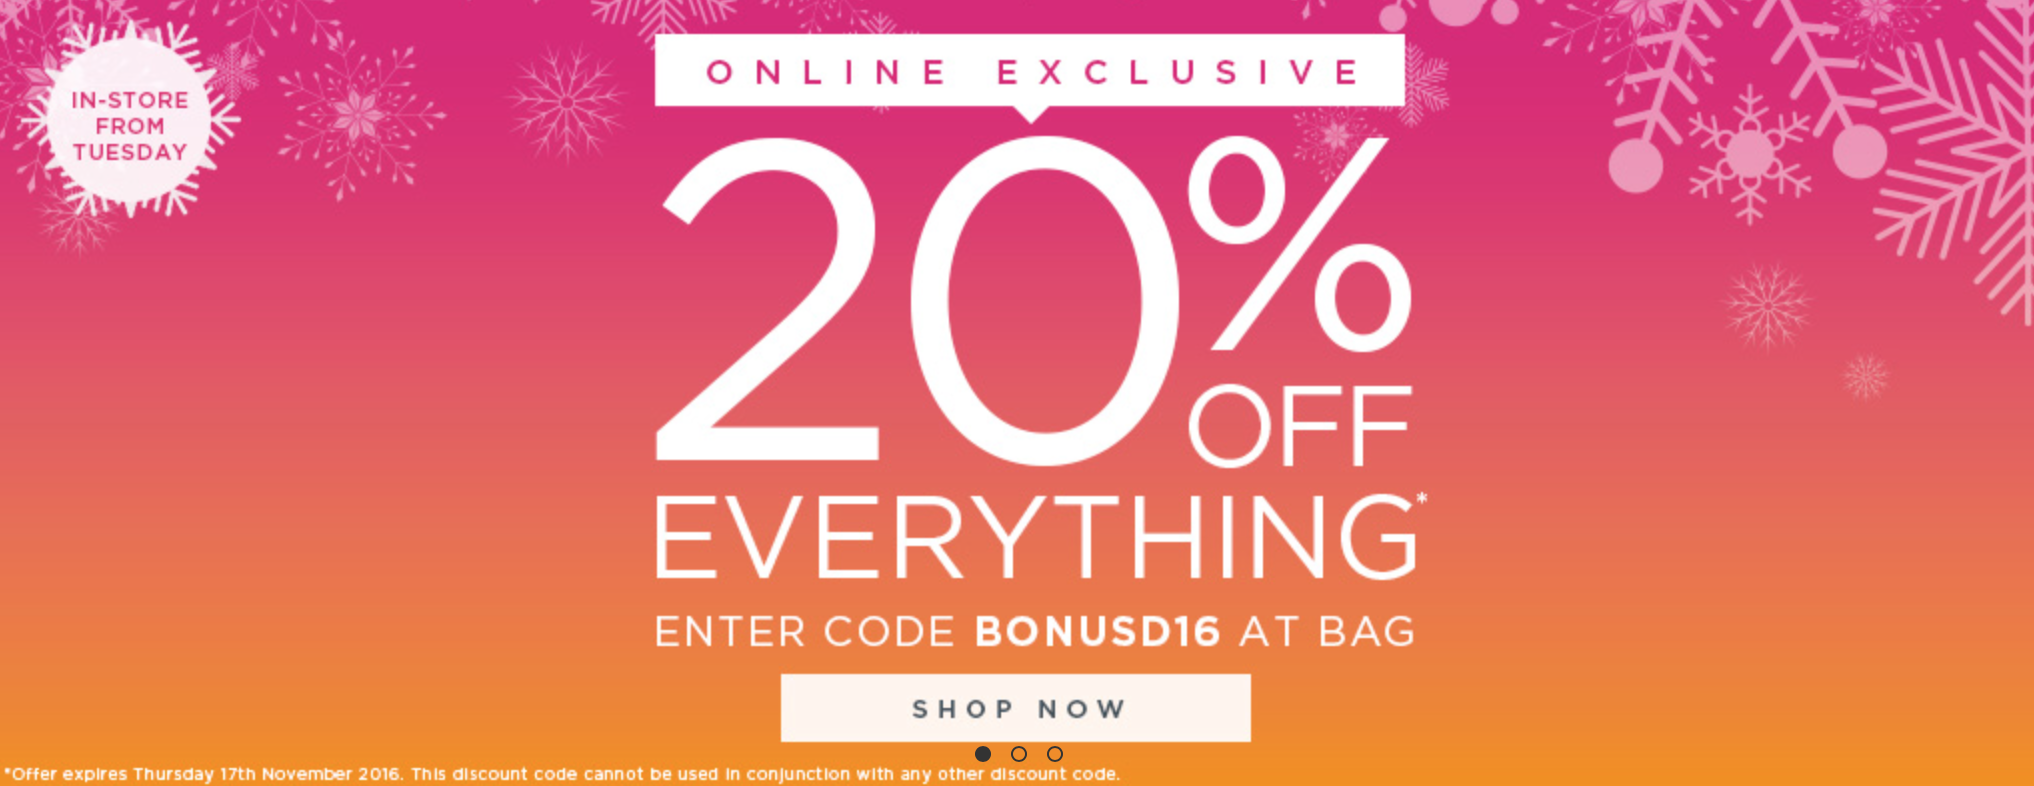 Bonmarche: 20% off everything